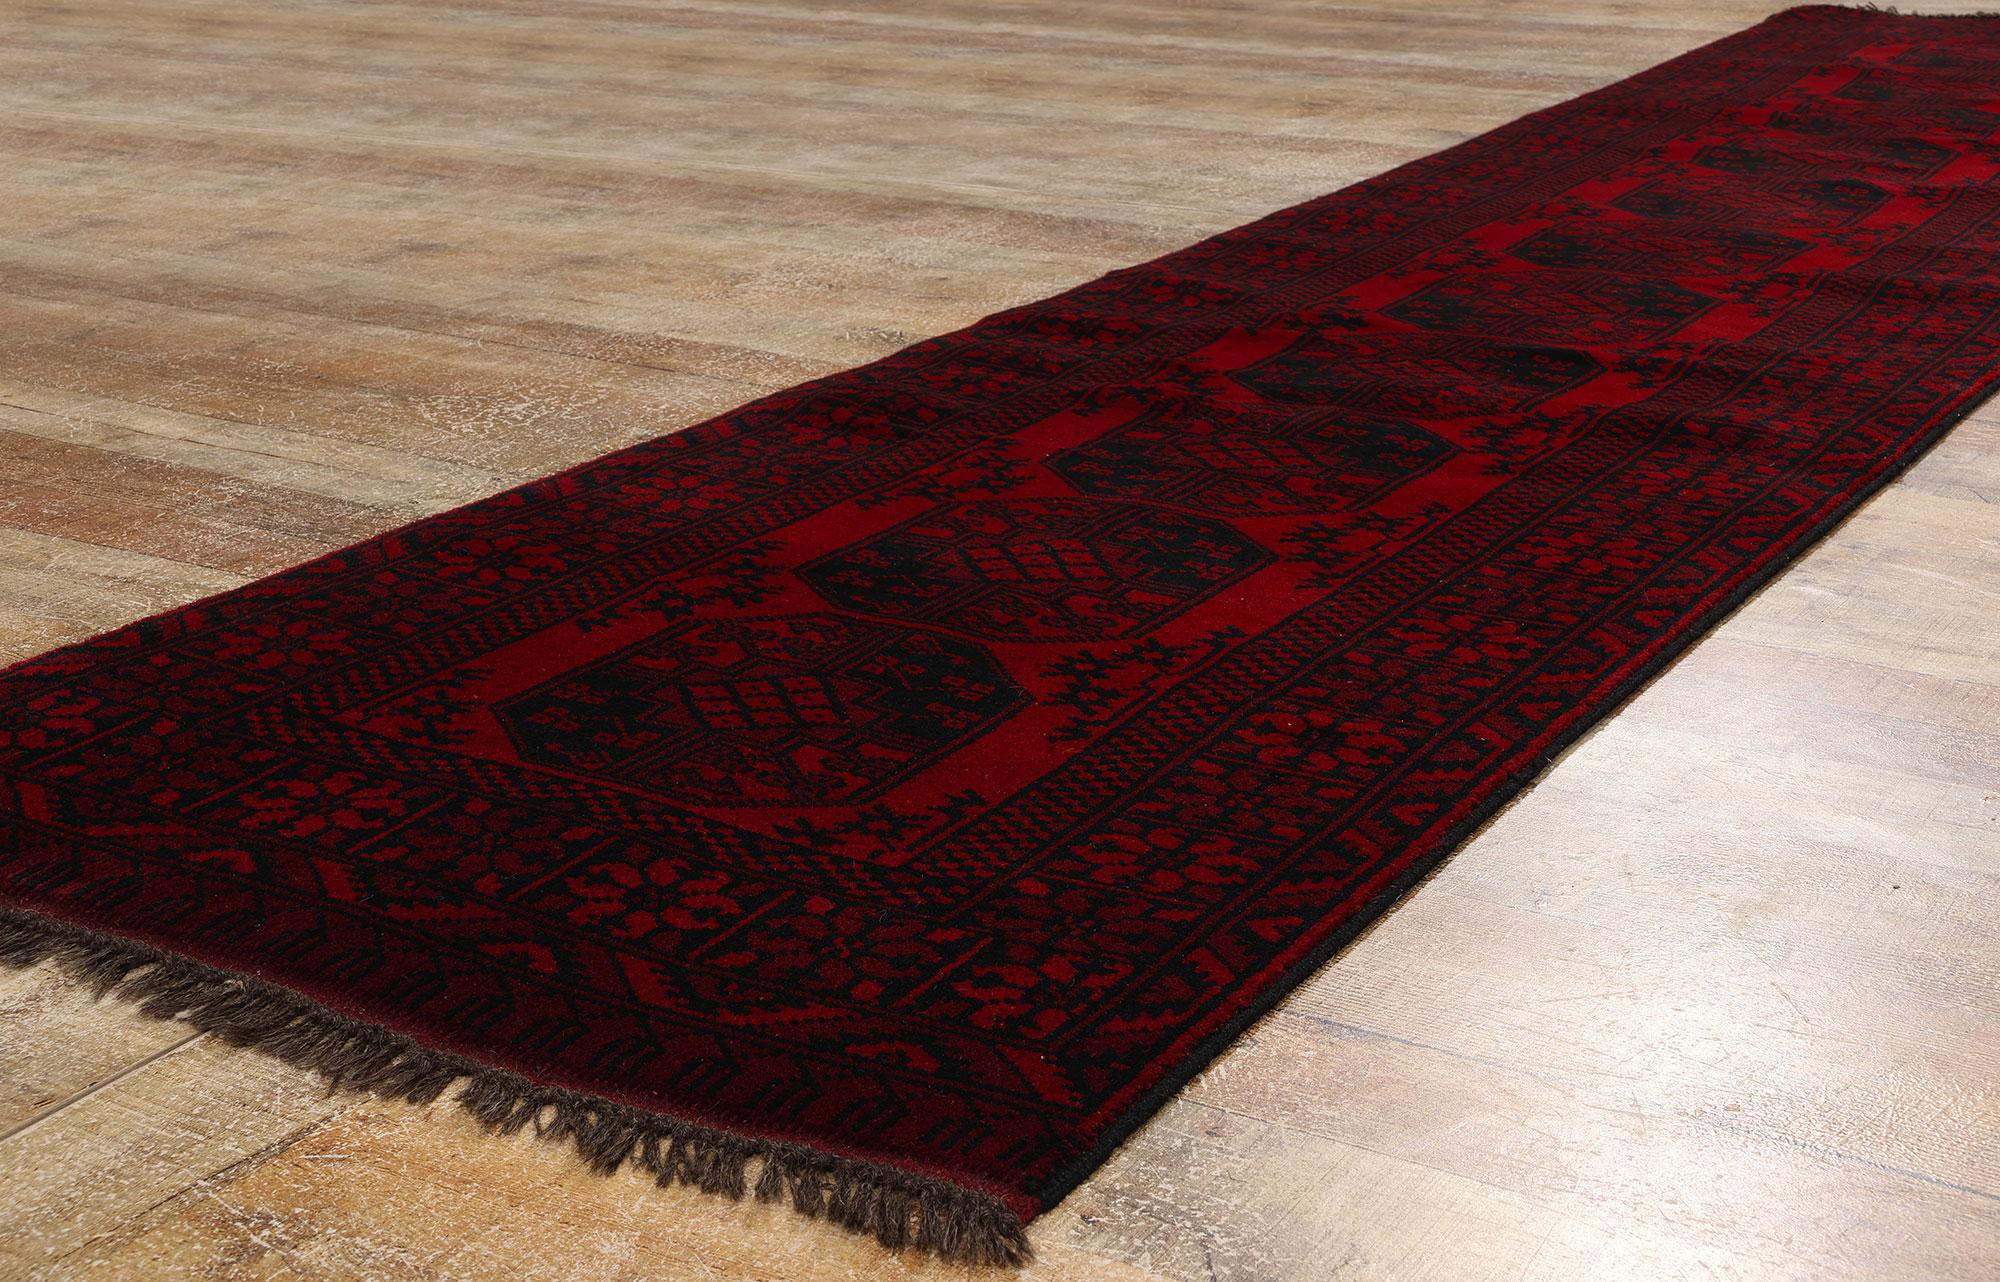 78718 Vintage Persian Turkoman Rug Runner, 02'09 x 12'10. A Persian Turkoman rug is a handwoven carpet originating from the Turkmen people, primarily in Central Asia, including parts of Iran. The addition of 